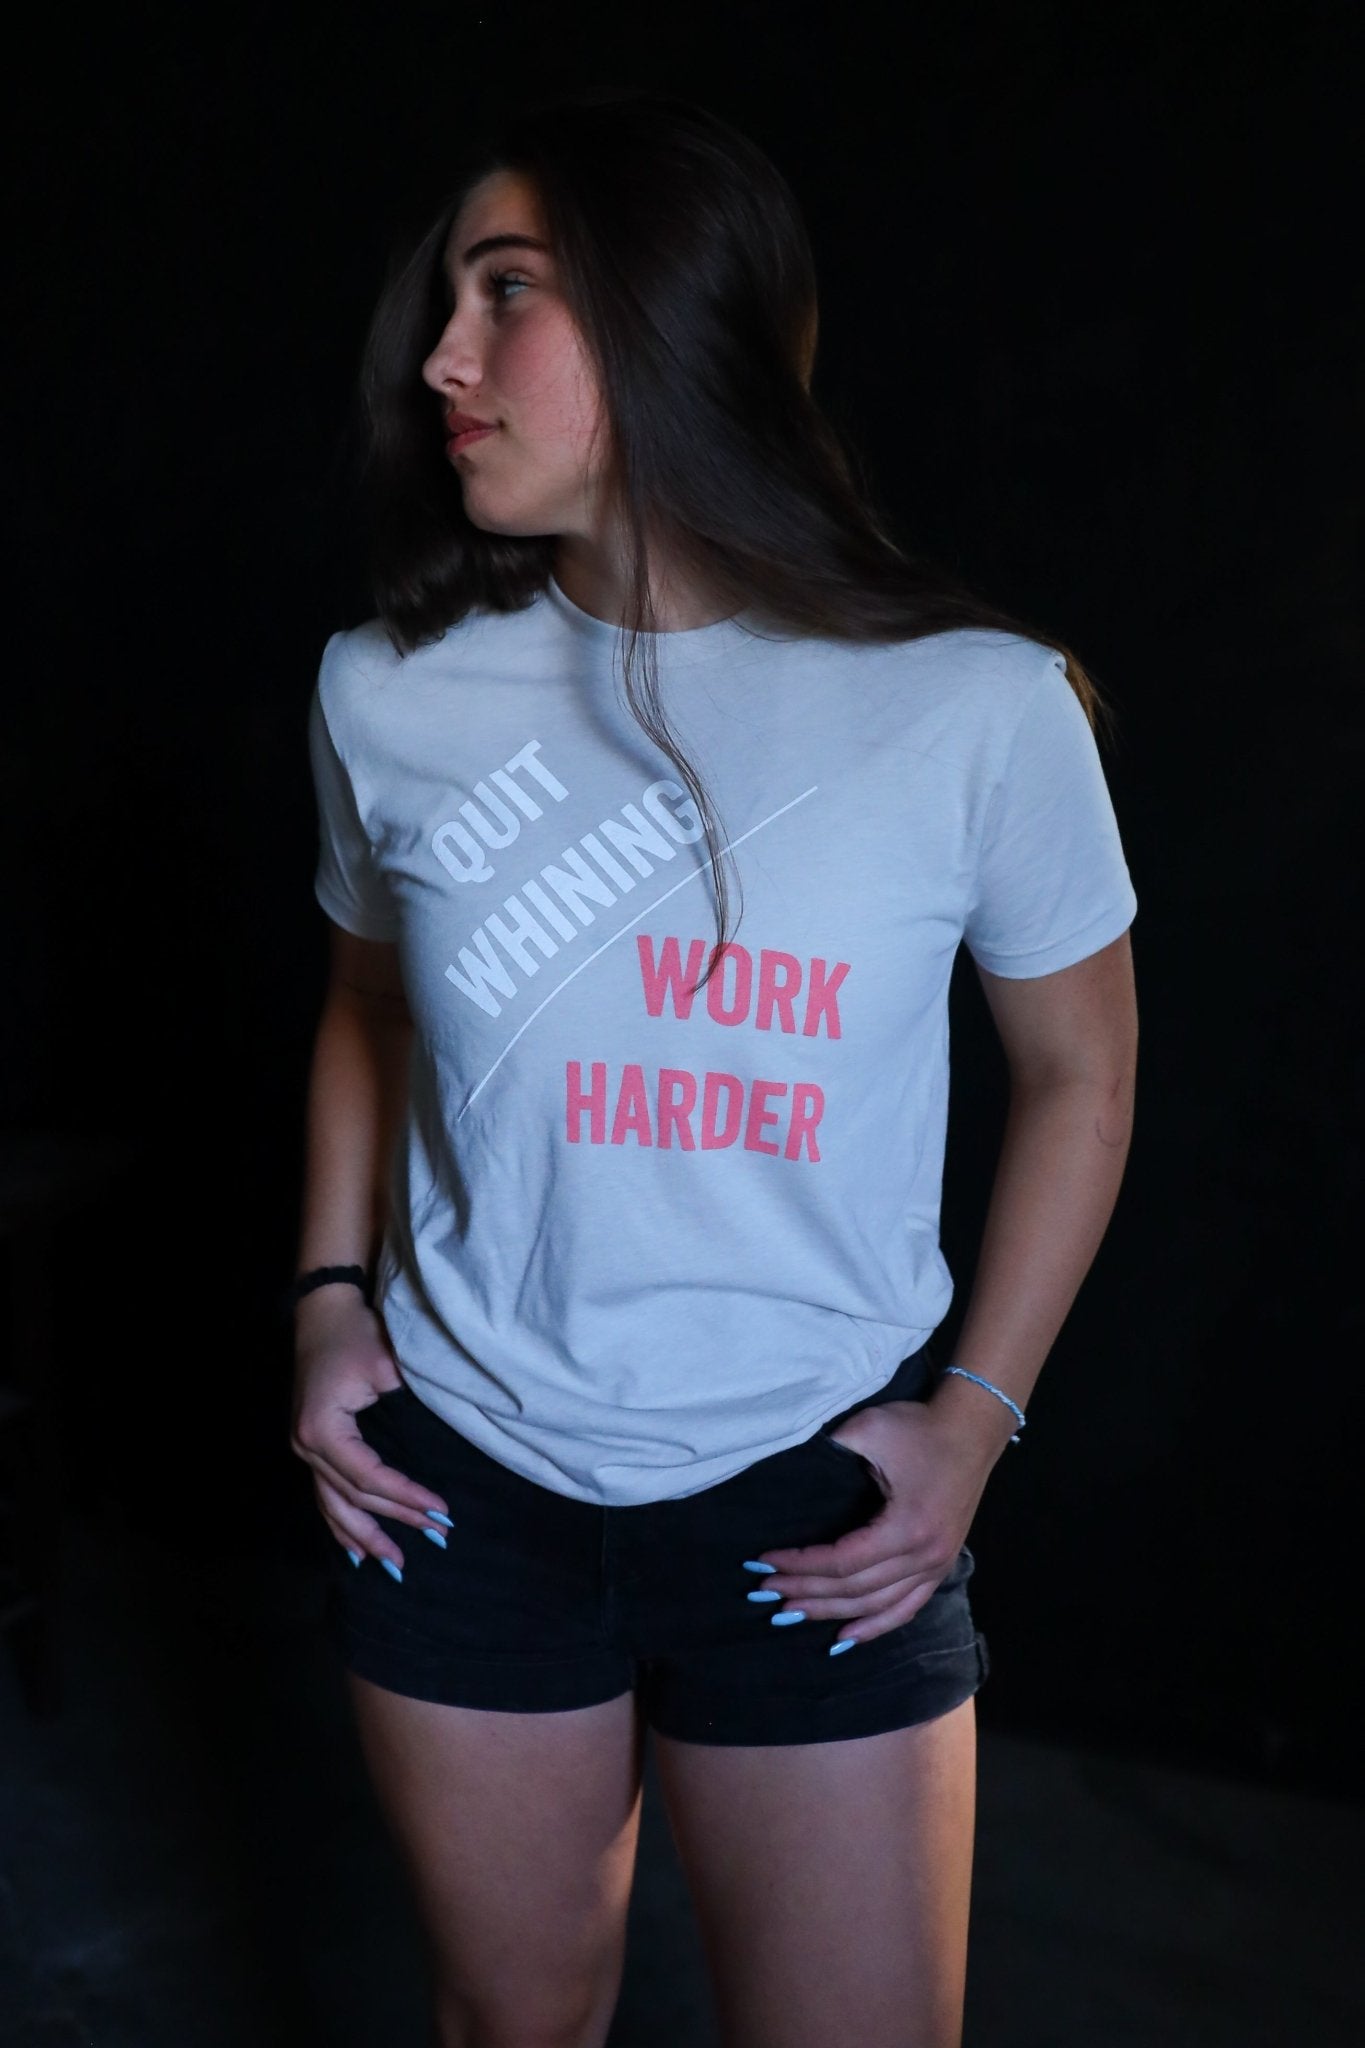 Quit Whining / Work Harder Tee - Sand - Live Restless, LLC.